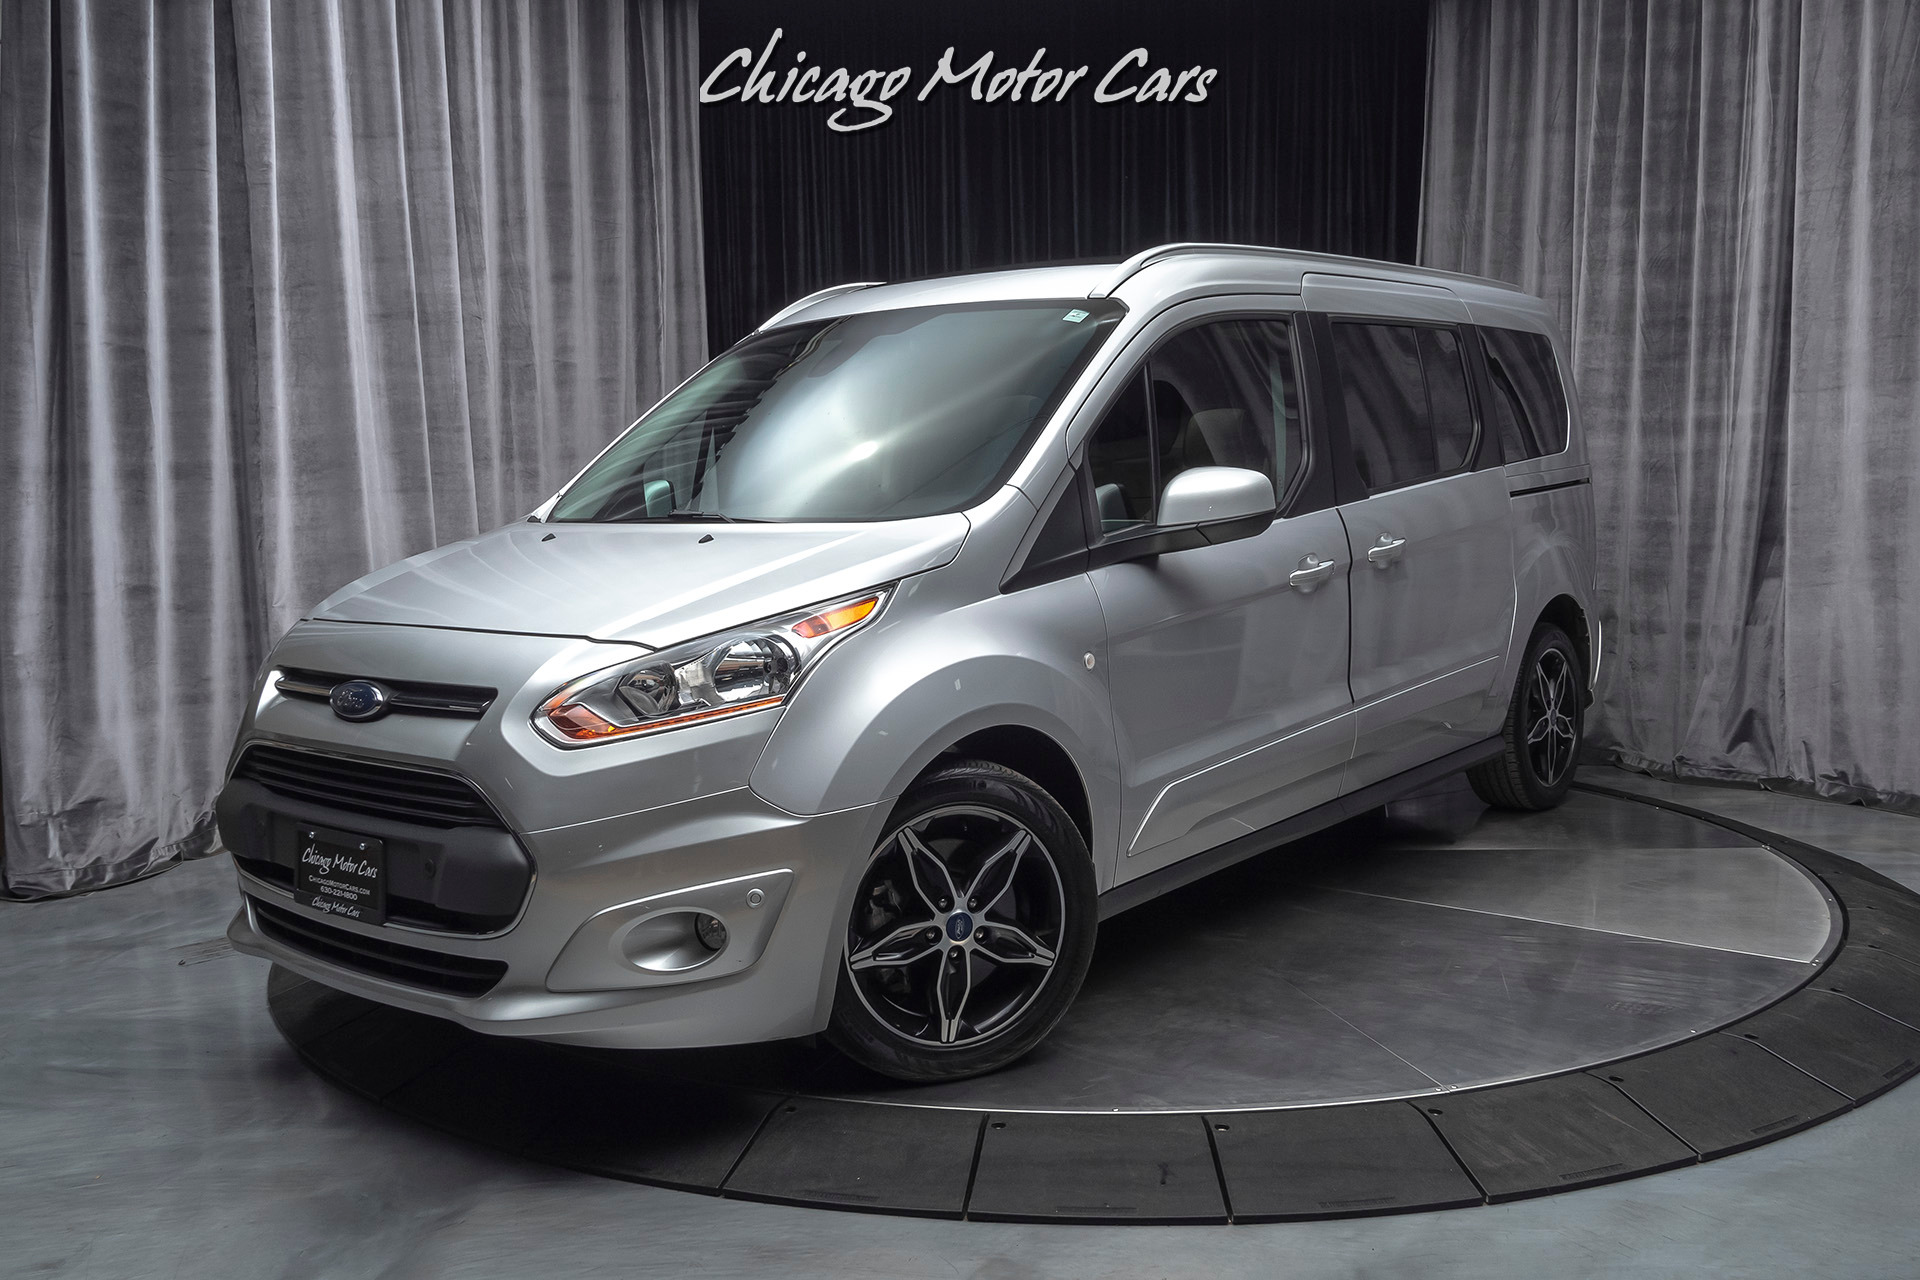 2018 ford transit connect wagon for sale